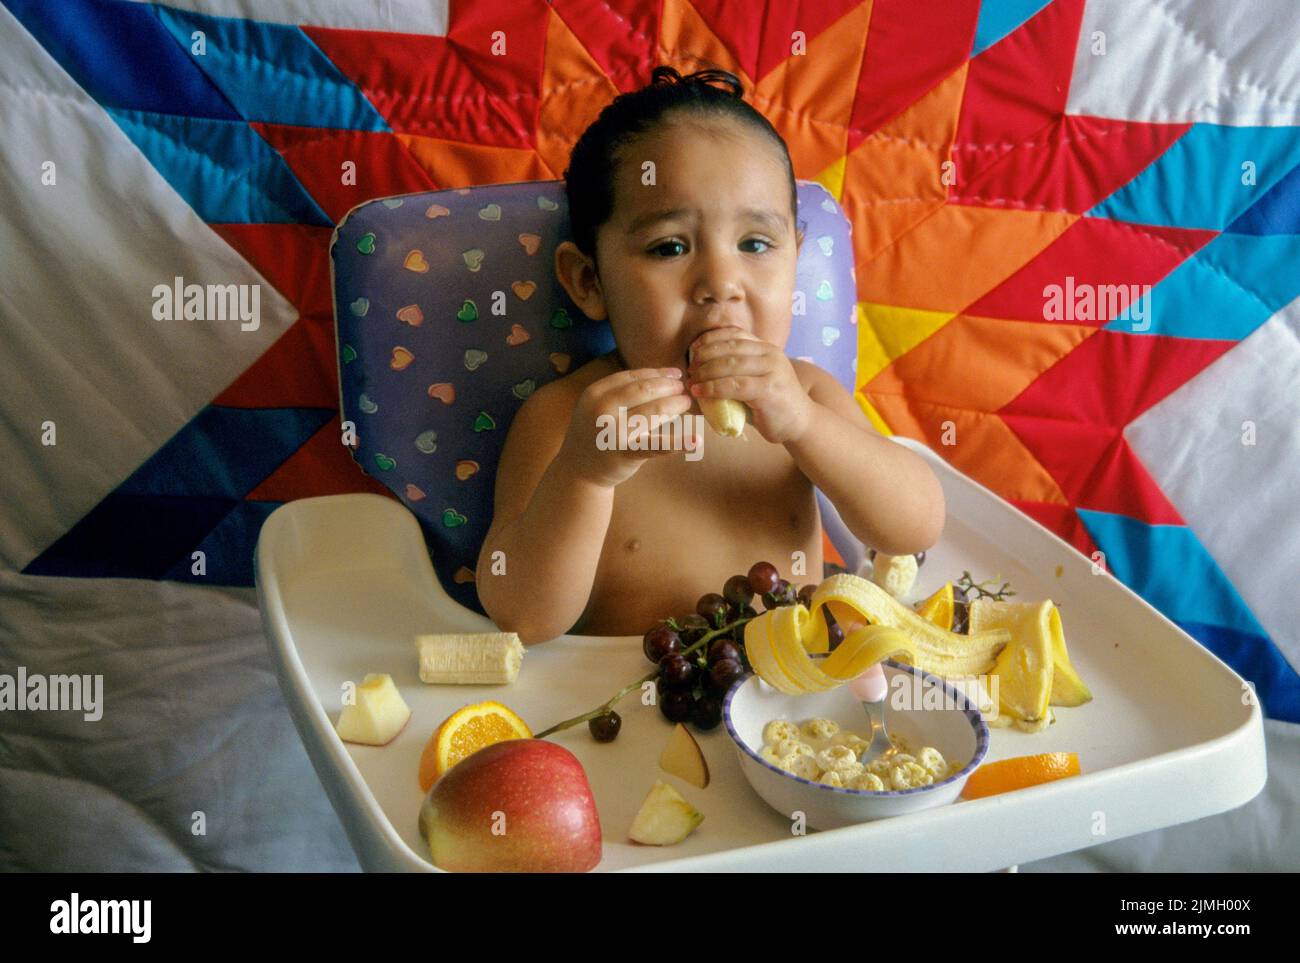 of fruit and cereal while sitting in a high chair. Fort Hall Idaho Stock Photo